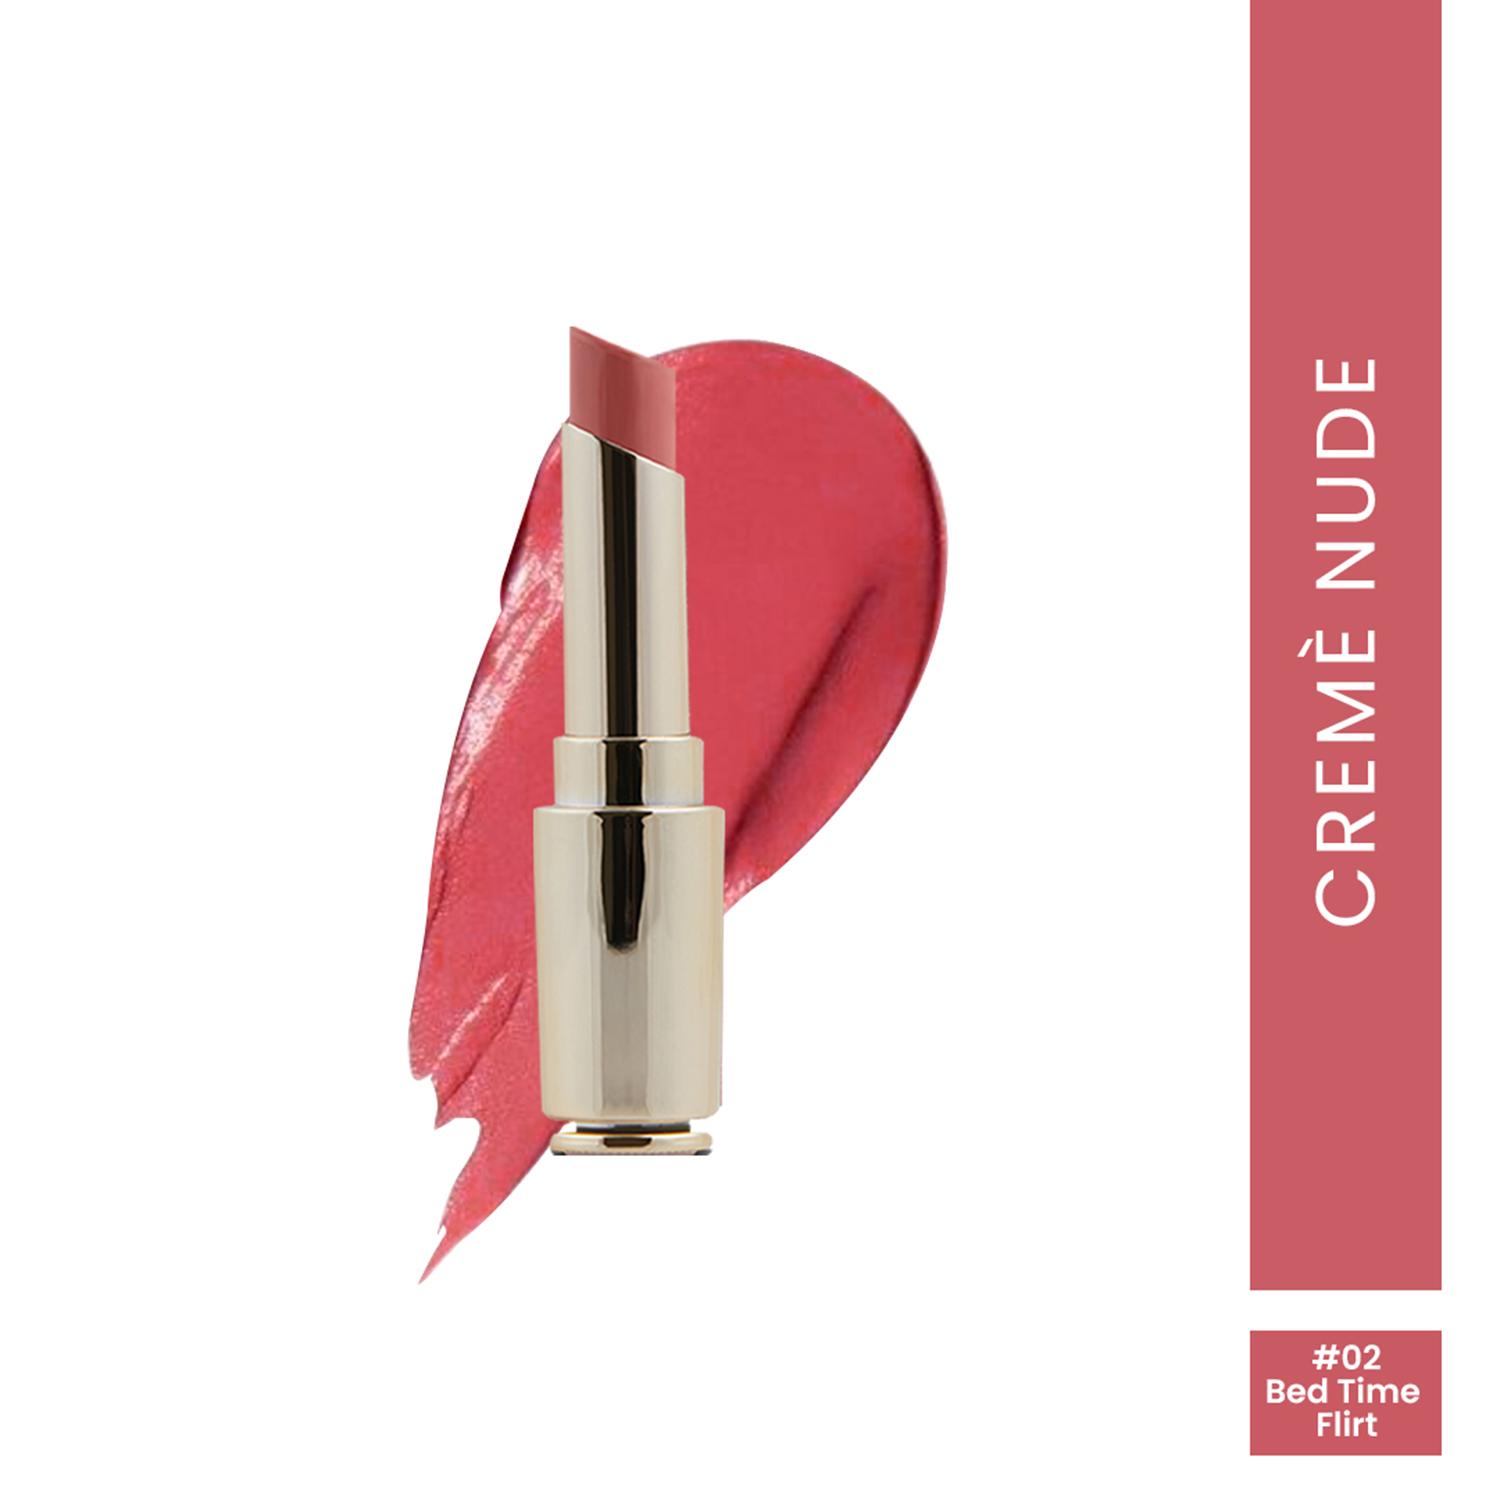 Charmacy Milano | Charmacy Milano Flattering Nude Lipstick - 02 Bed Time Flirt (3.8g)